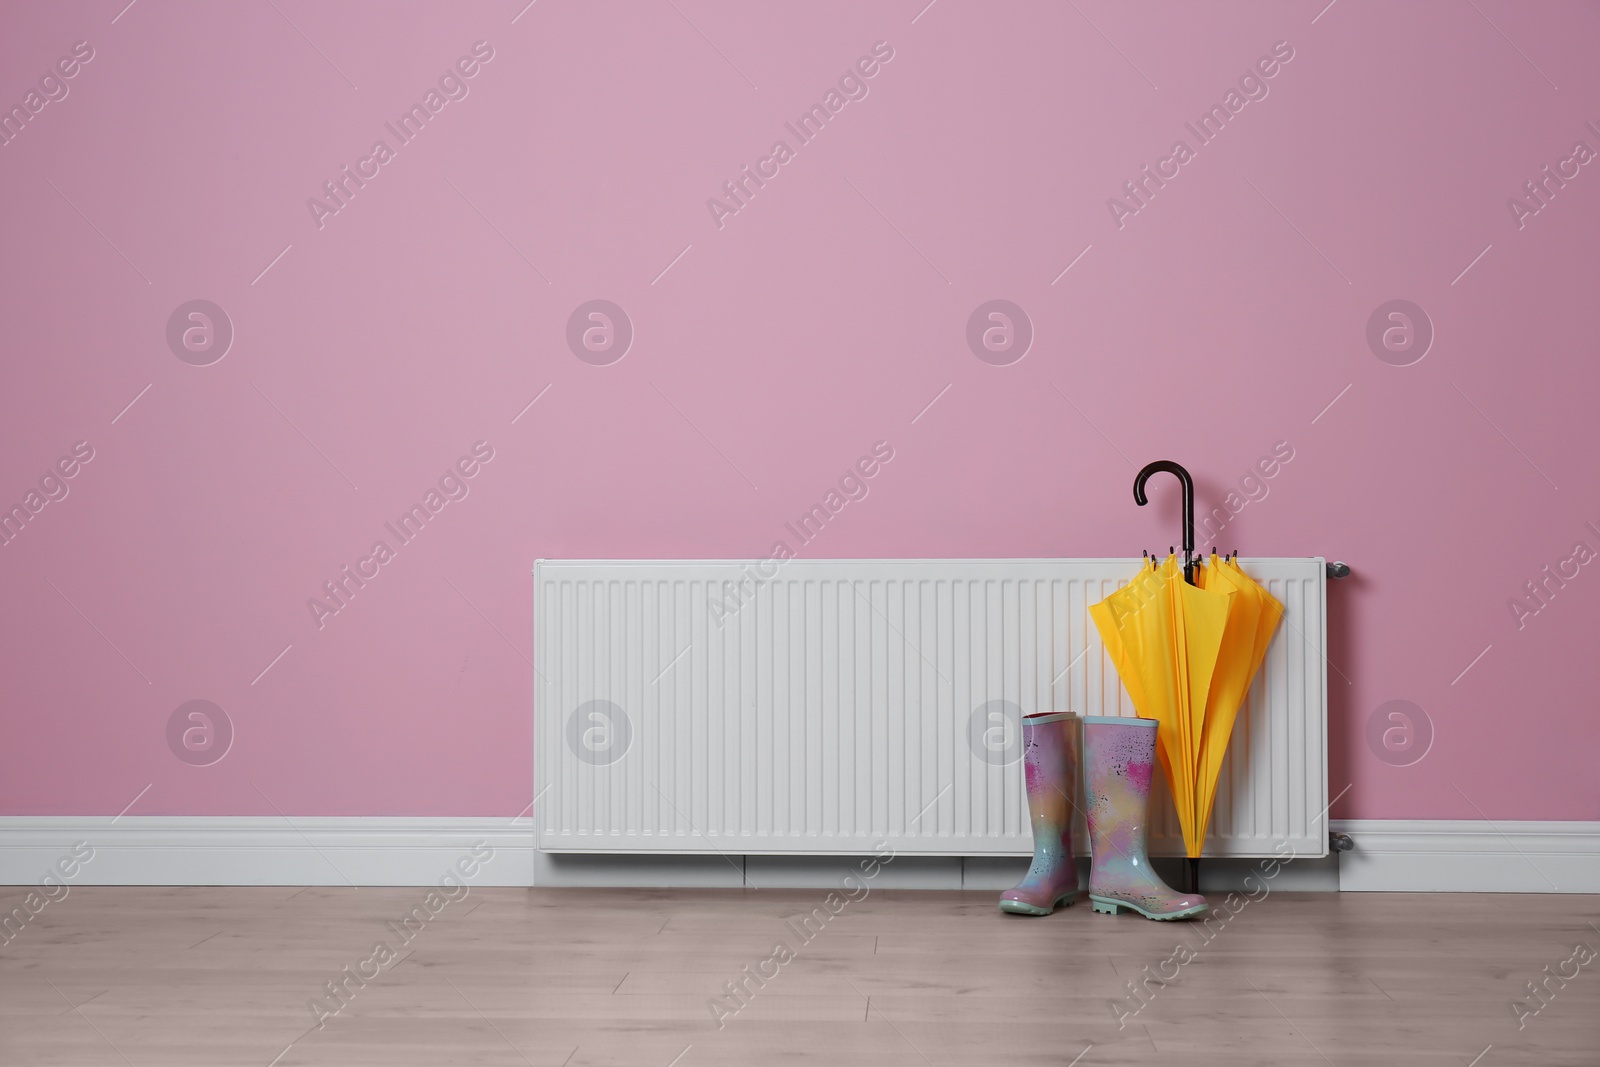 Photo of Modern radiator, rubber boots and umbrella near color wall with space for text. Central heating system